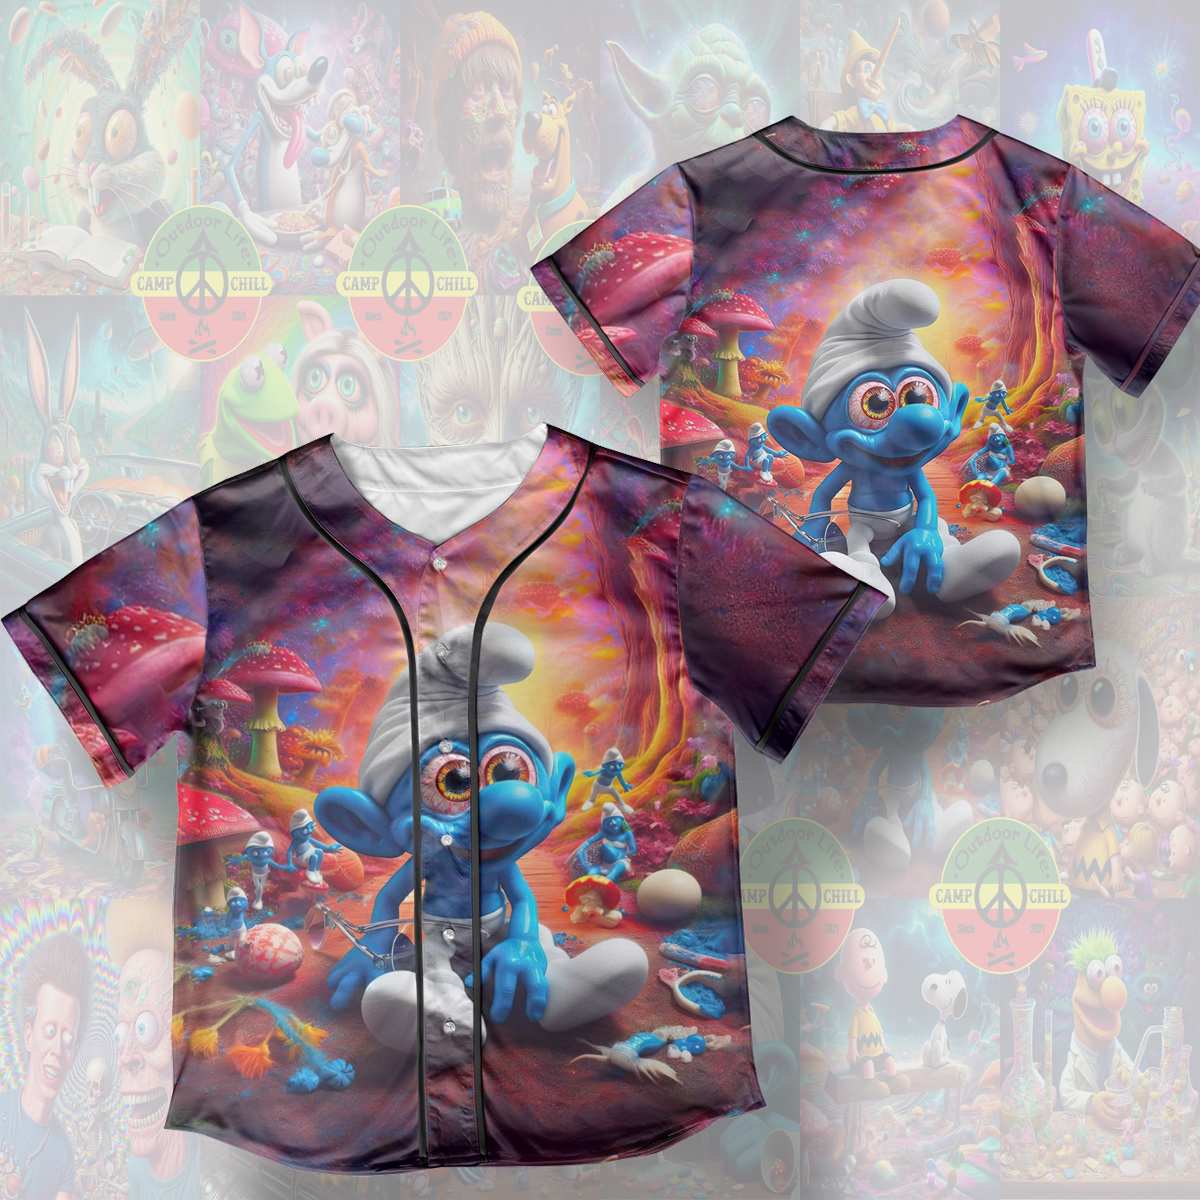 Mr.smurfs Psychedelic Style Cover Rave Edm Jersey